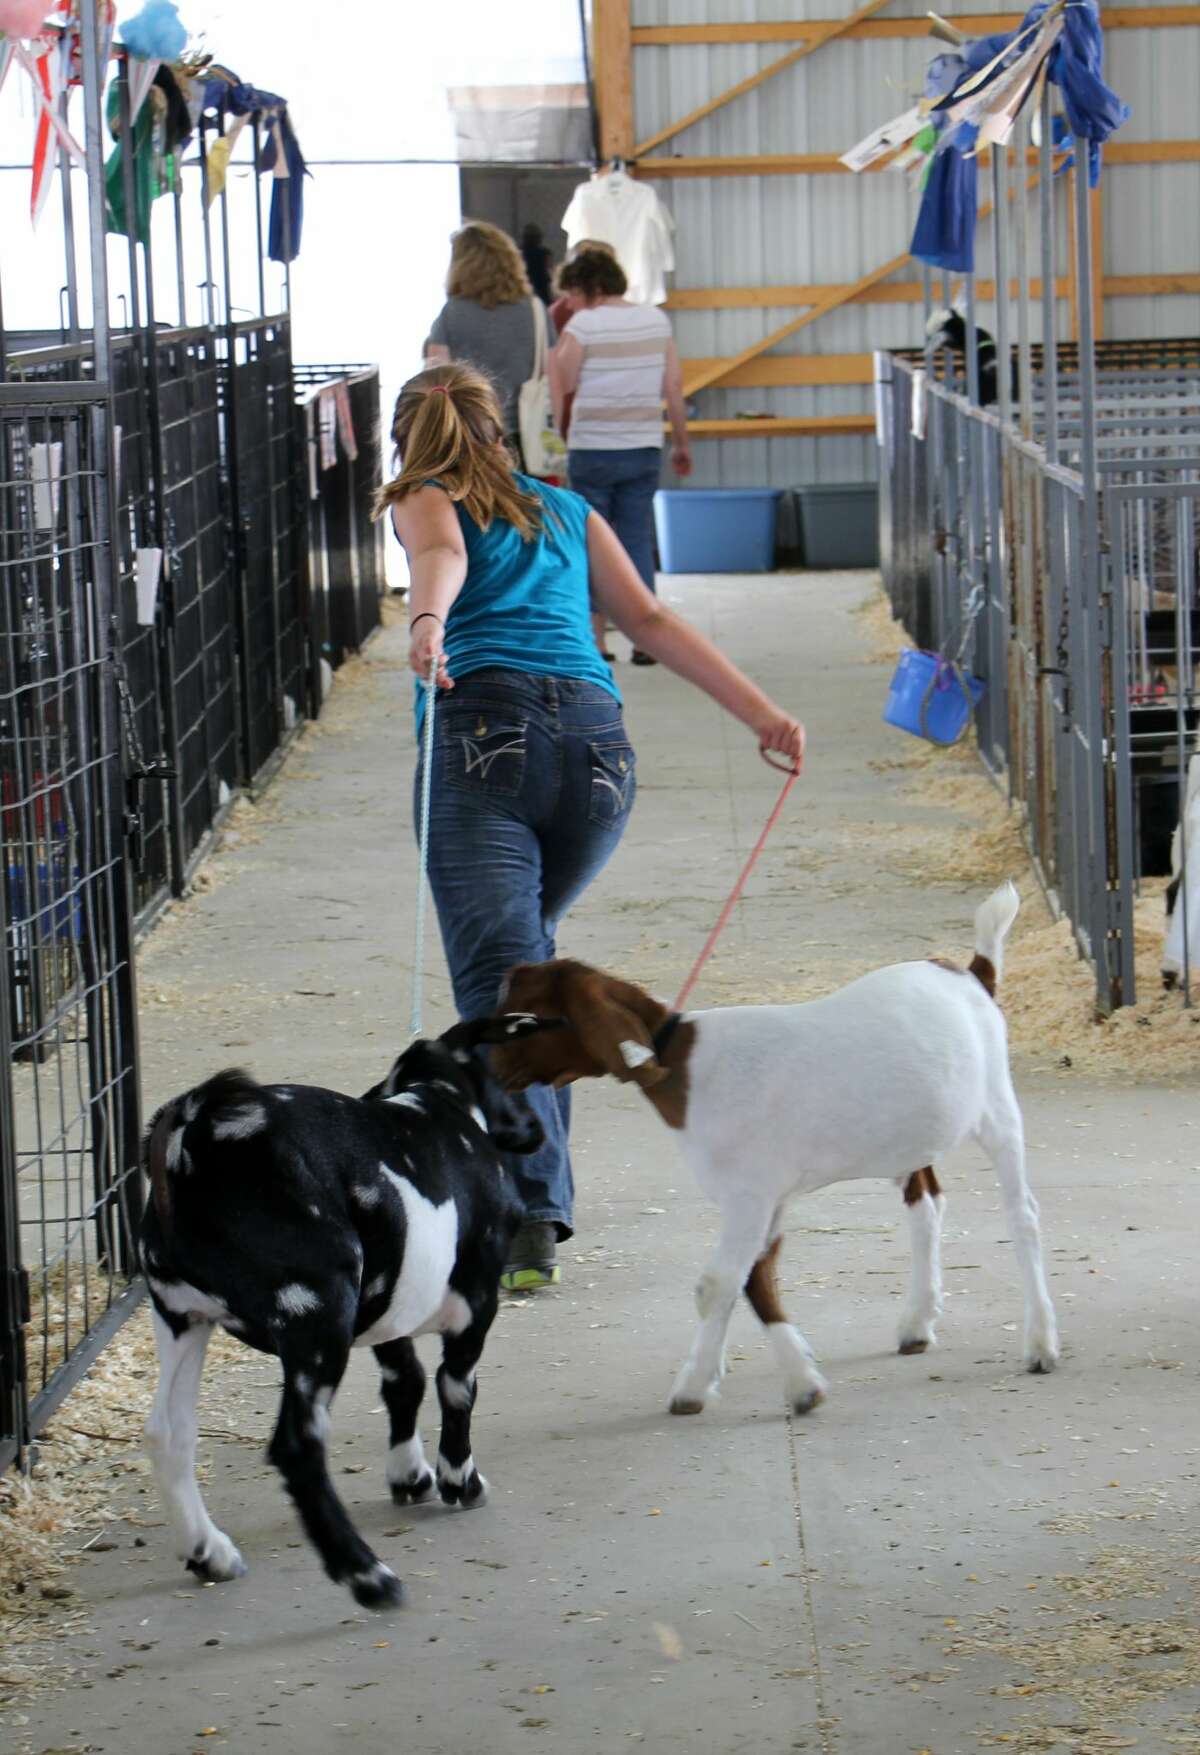 Prospect feeder and poultry shows were highlights of Wednesday's Huron Community Fair, while the Midway was, as always, a big draw.